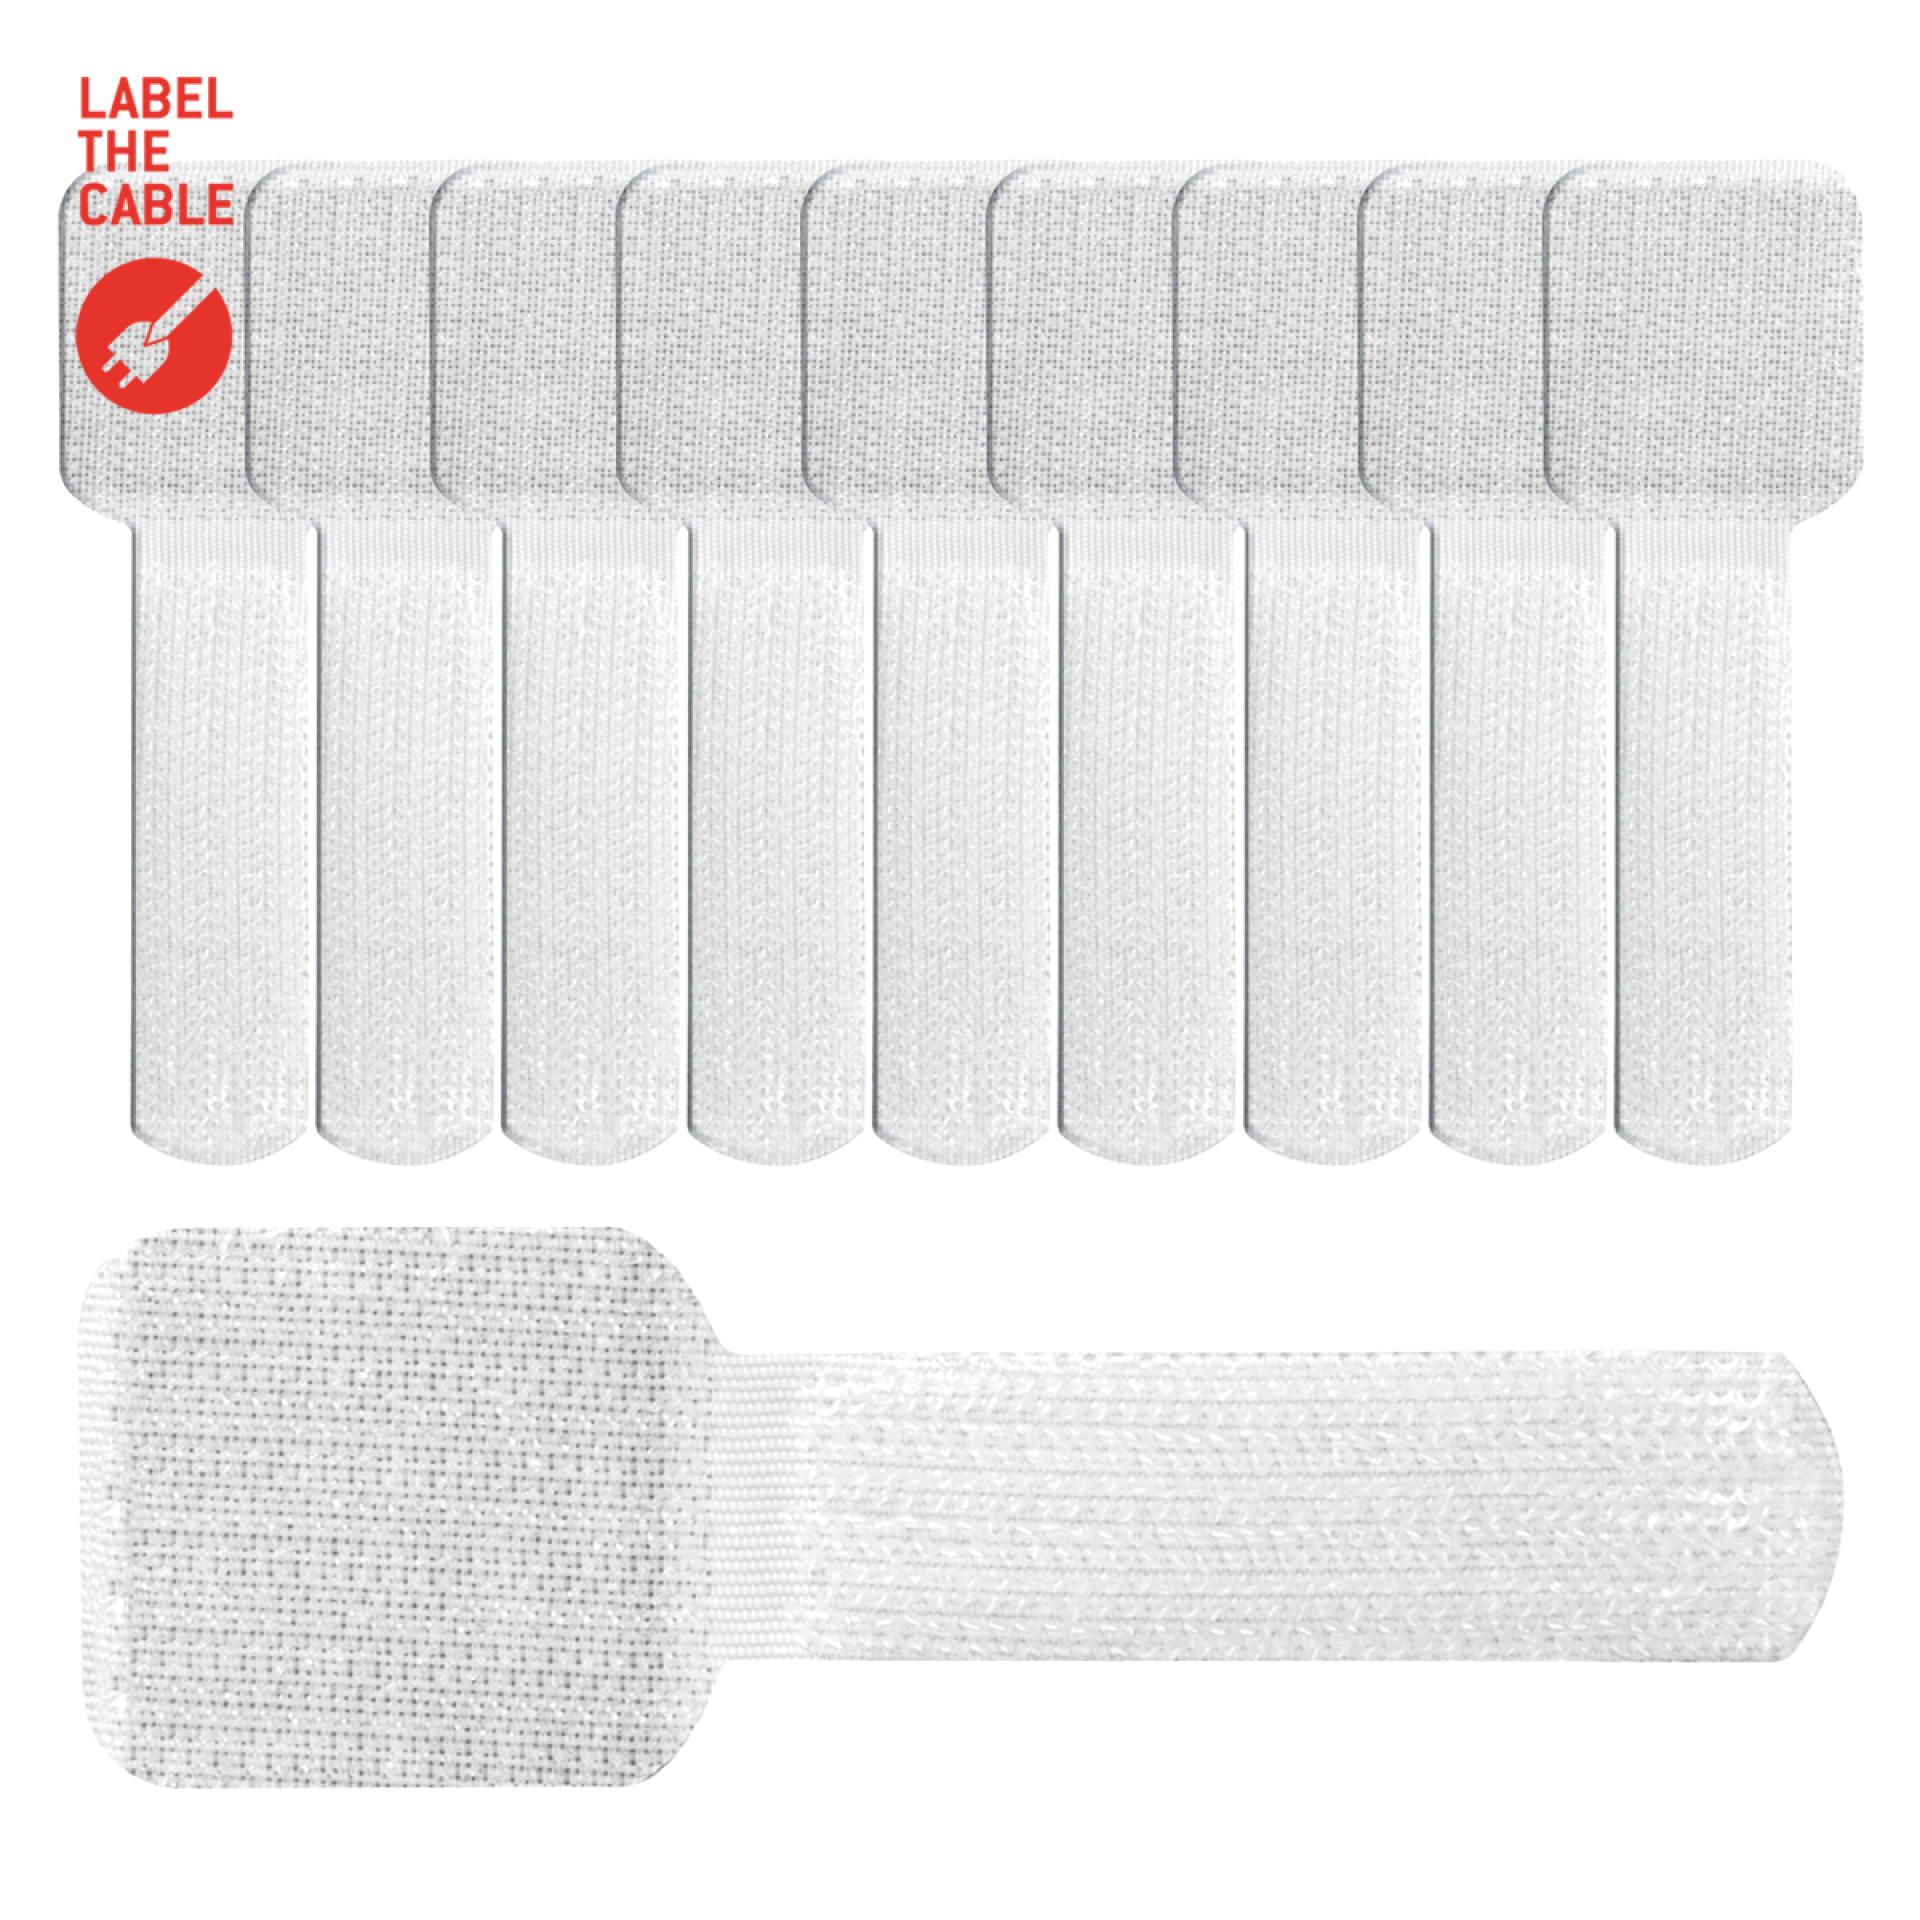 LTC WALL STRAPS, self-adhesive hook and loop cable holders set of 10 pcs white